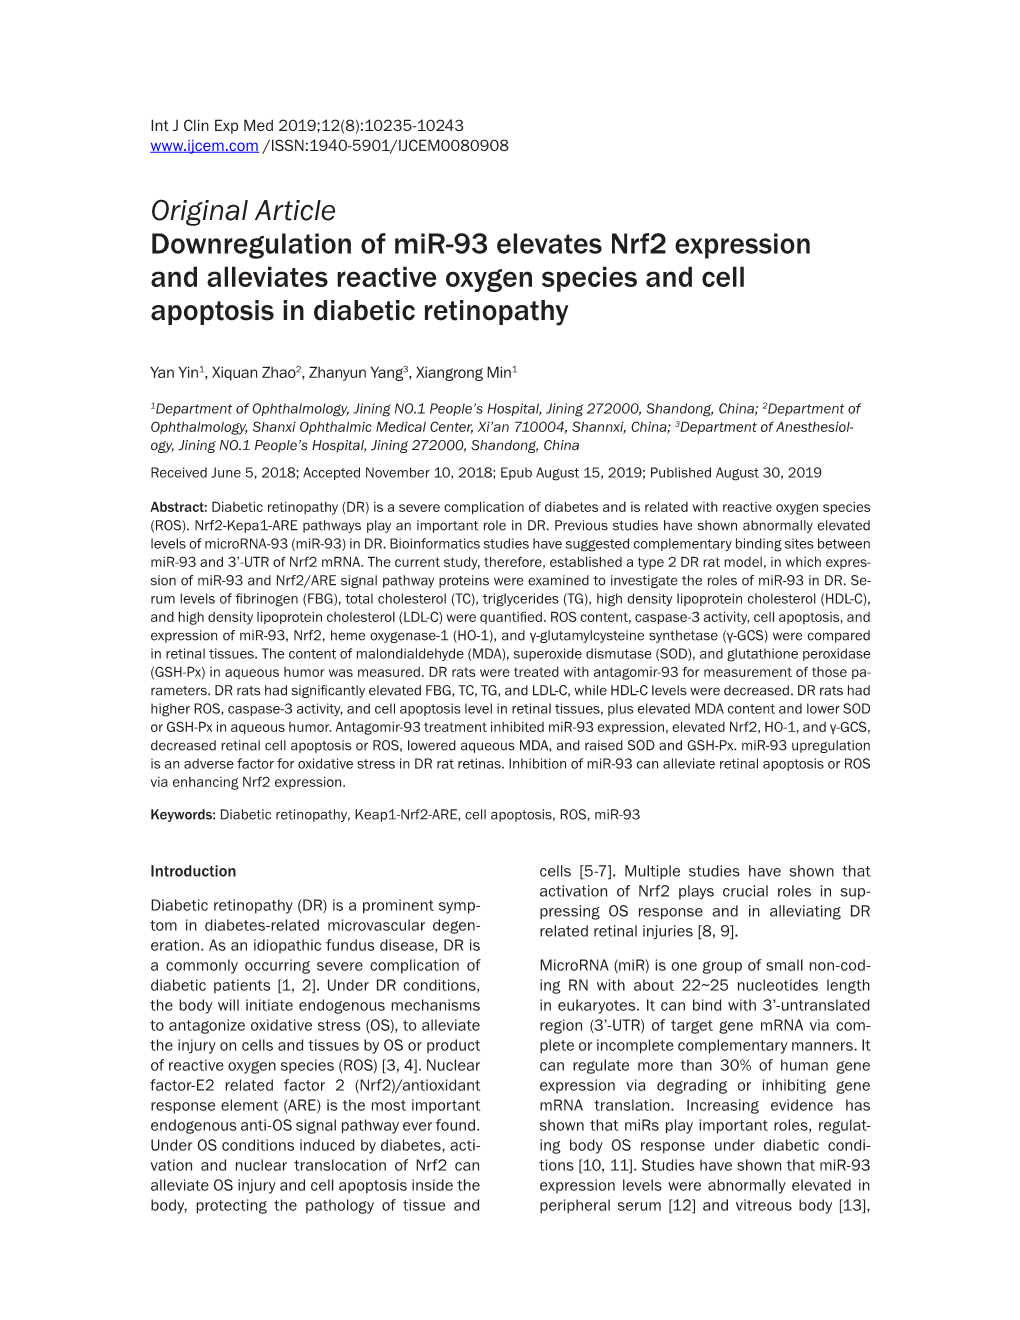 Original Article Downregulation of Mir-93 Elevates Nrf2 Expression and Alleviates Reactive Oxygen Species and Cell Apoptosis in Diabetic Retinopathy